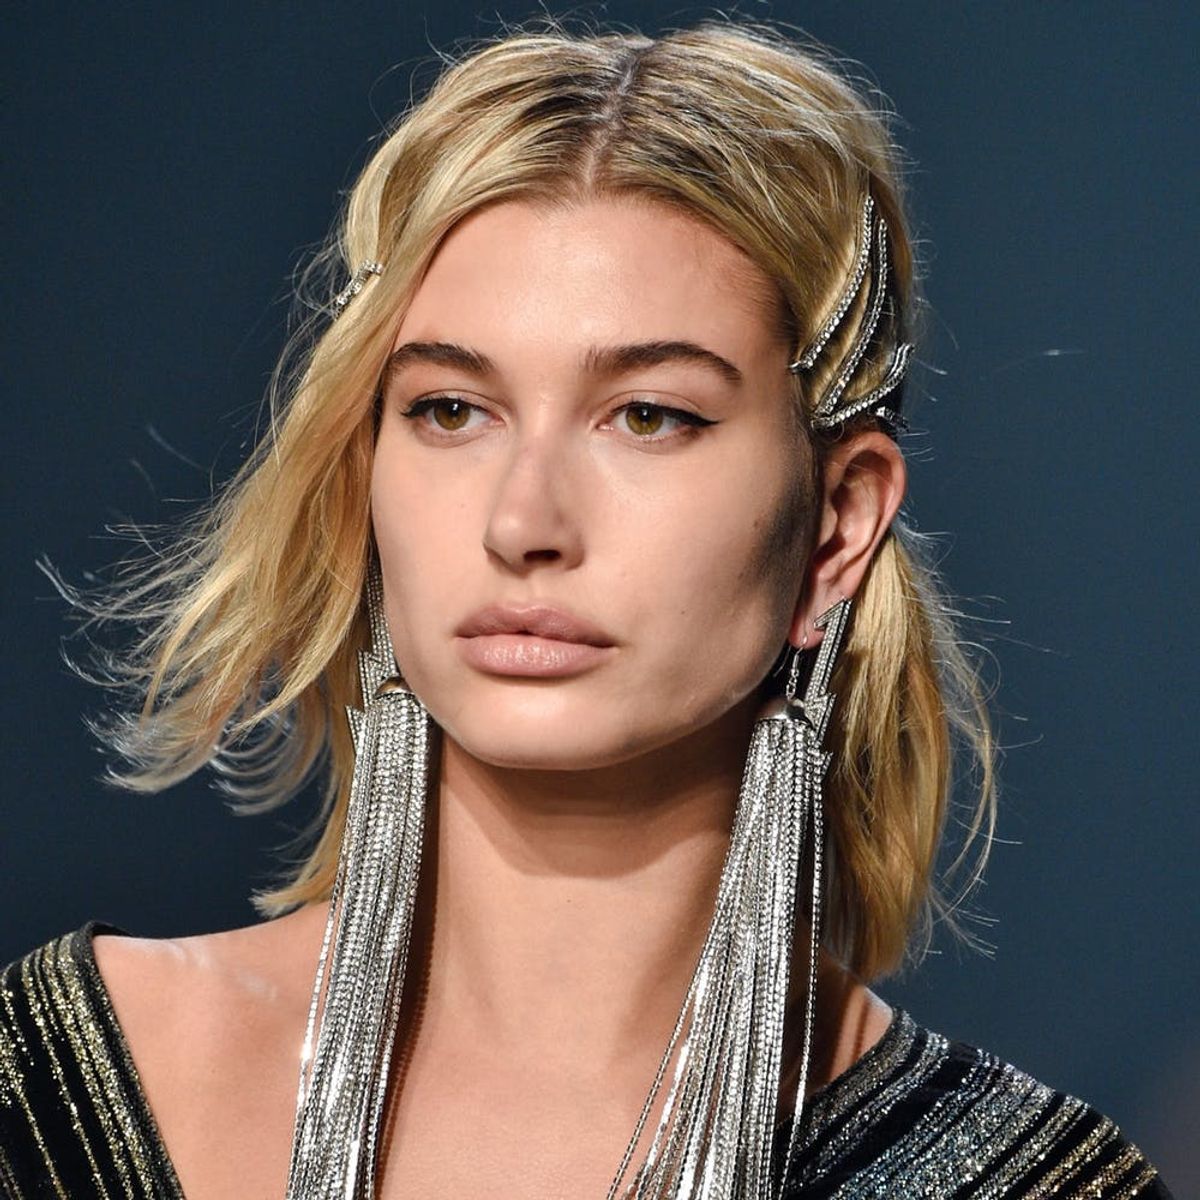 Hailey Baldwin Had the Longest Earrings Ever for the Zadig & Voltaire NYFW Show